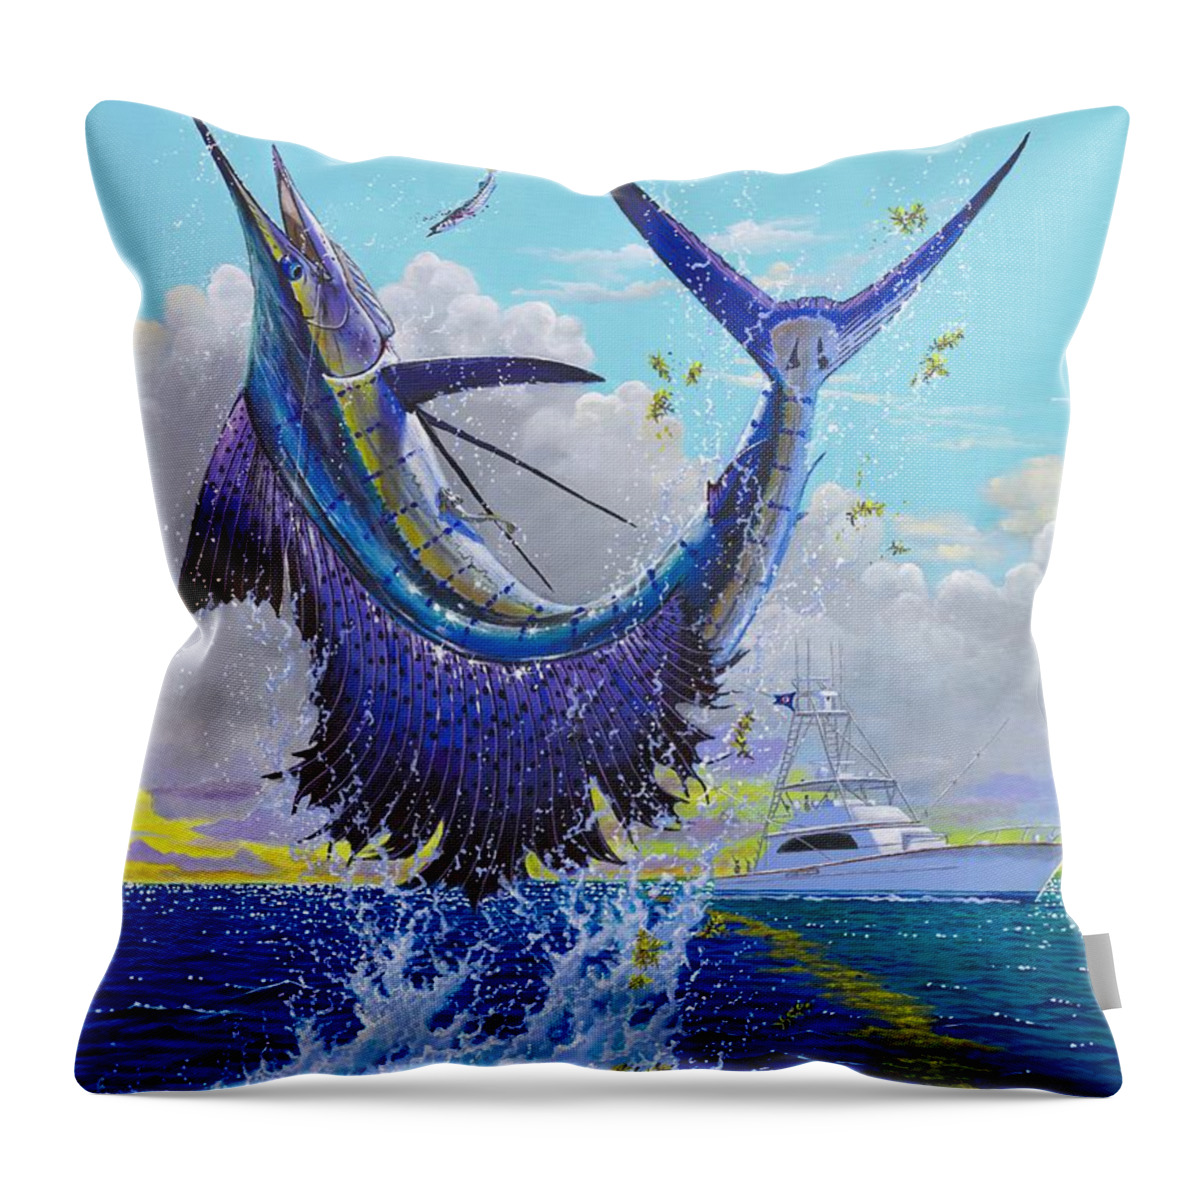 Sailfish Throw Pillow featuring the painting Hooked Up Off004 by Carey Chen